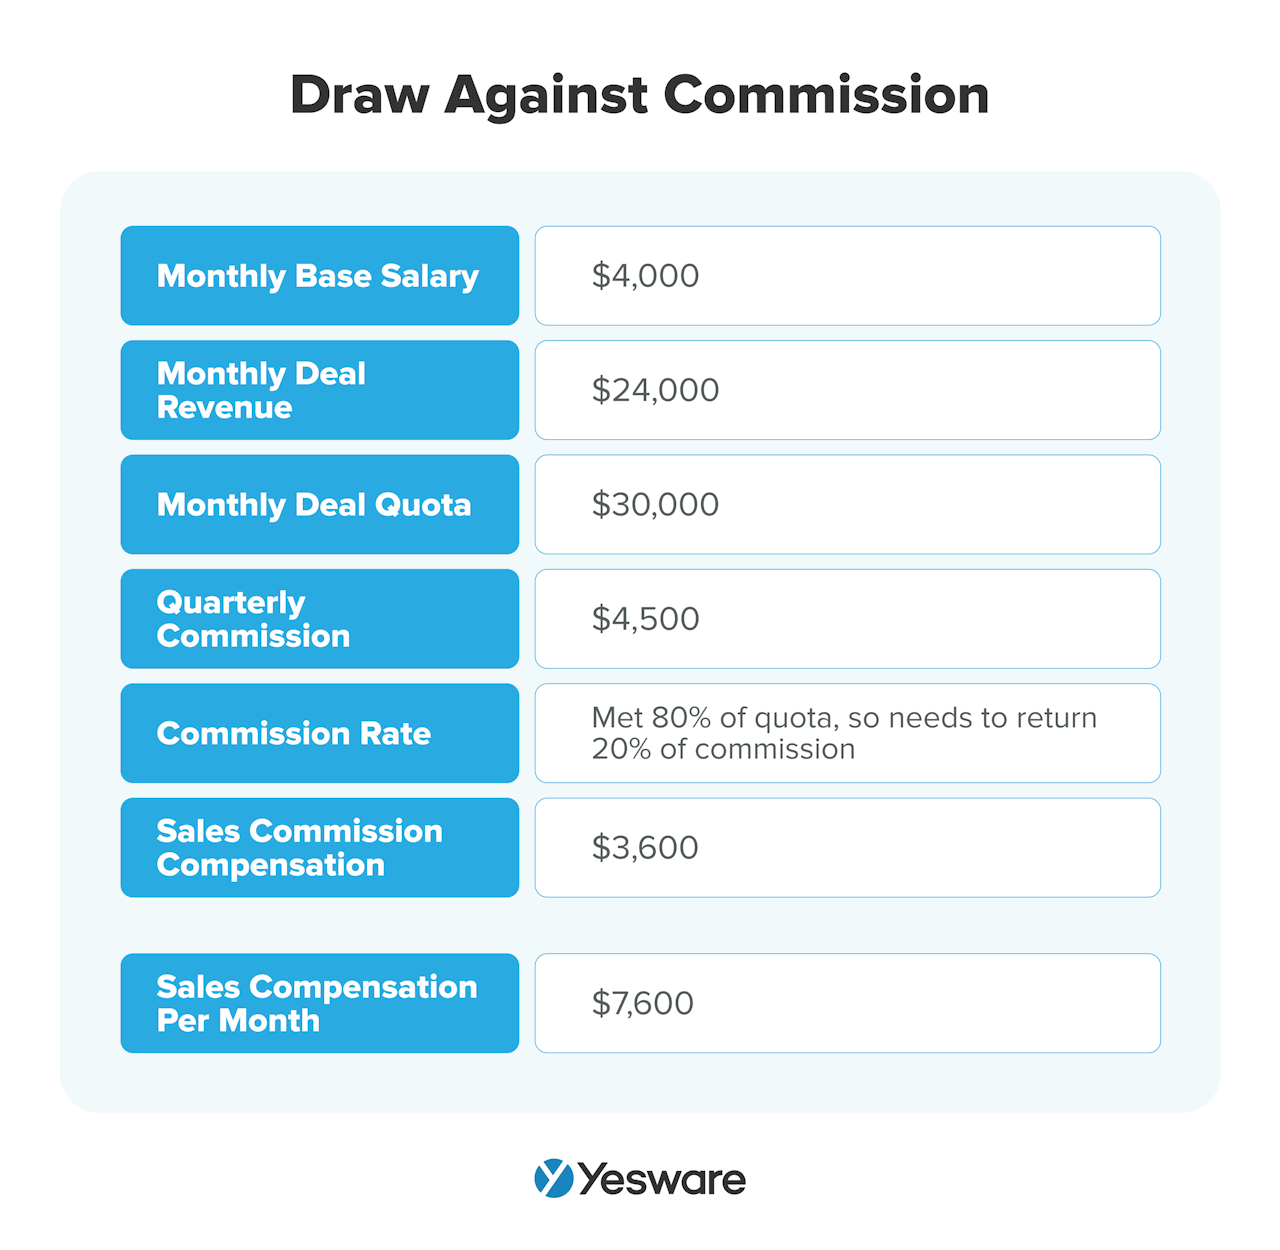 Sales Commission Structure: Draw Against Commission